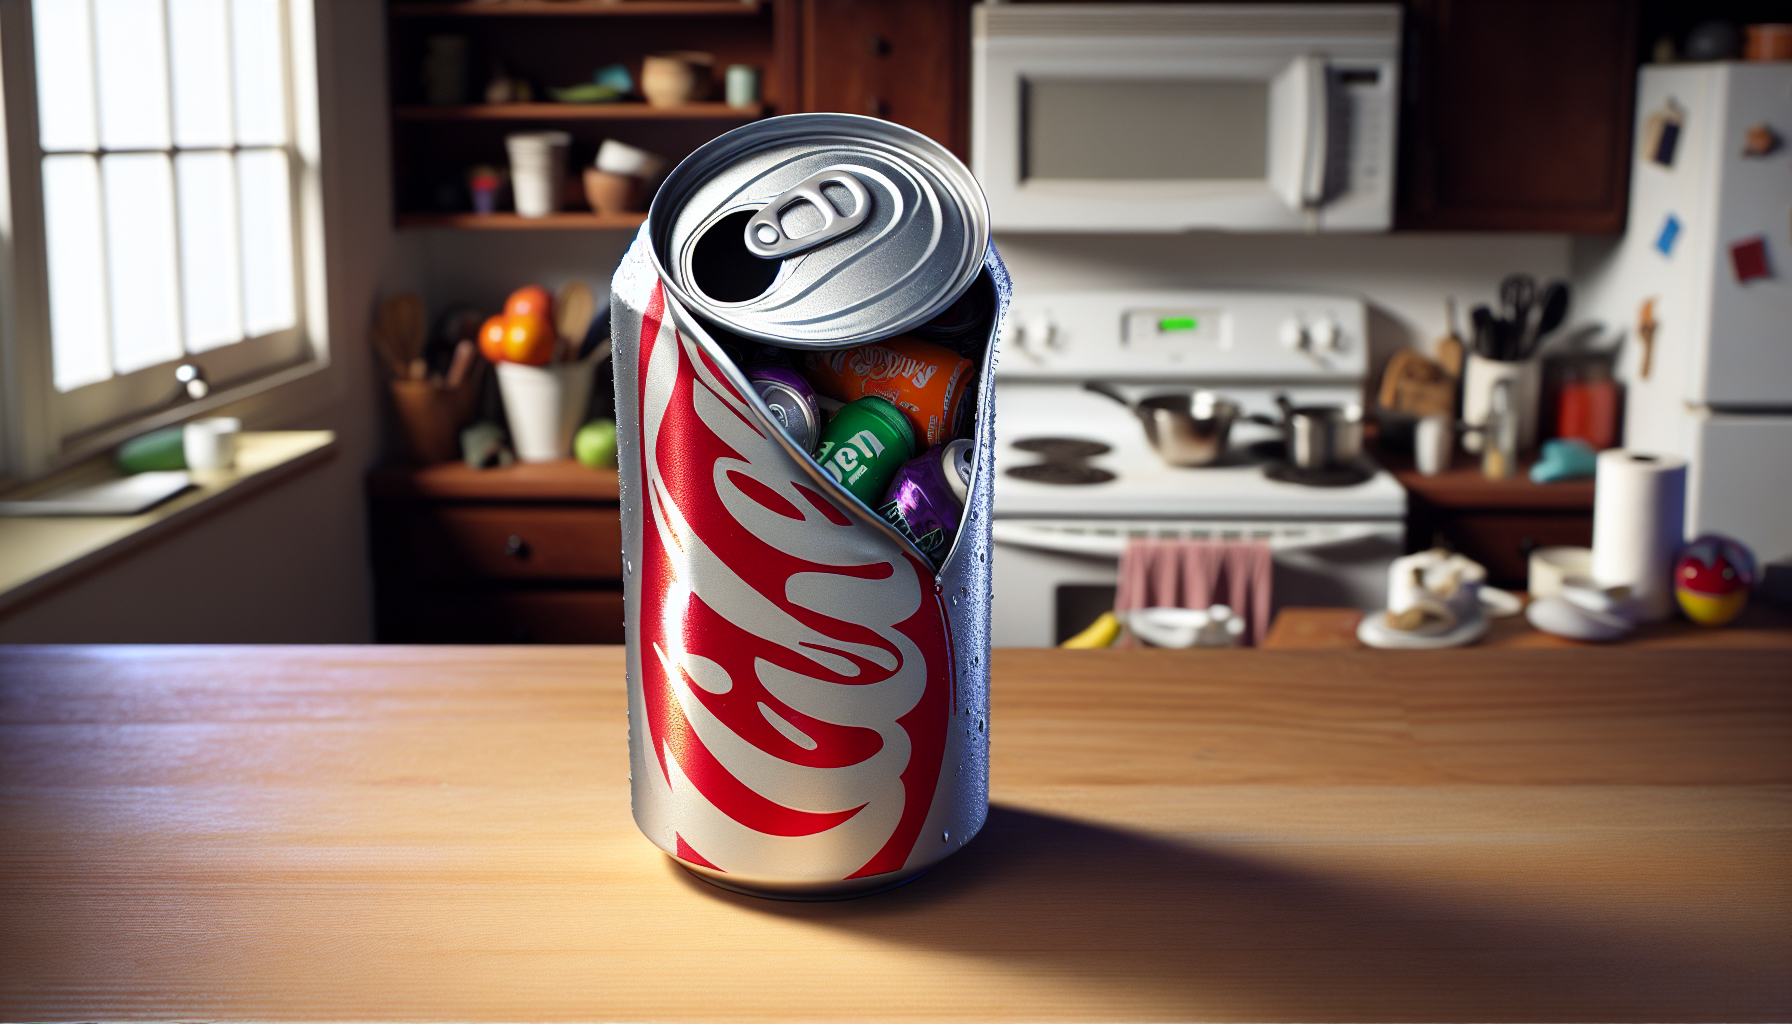 Stash can disguised as a soda can; call us if your child is suffering from substance abuse. 